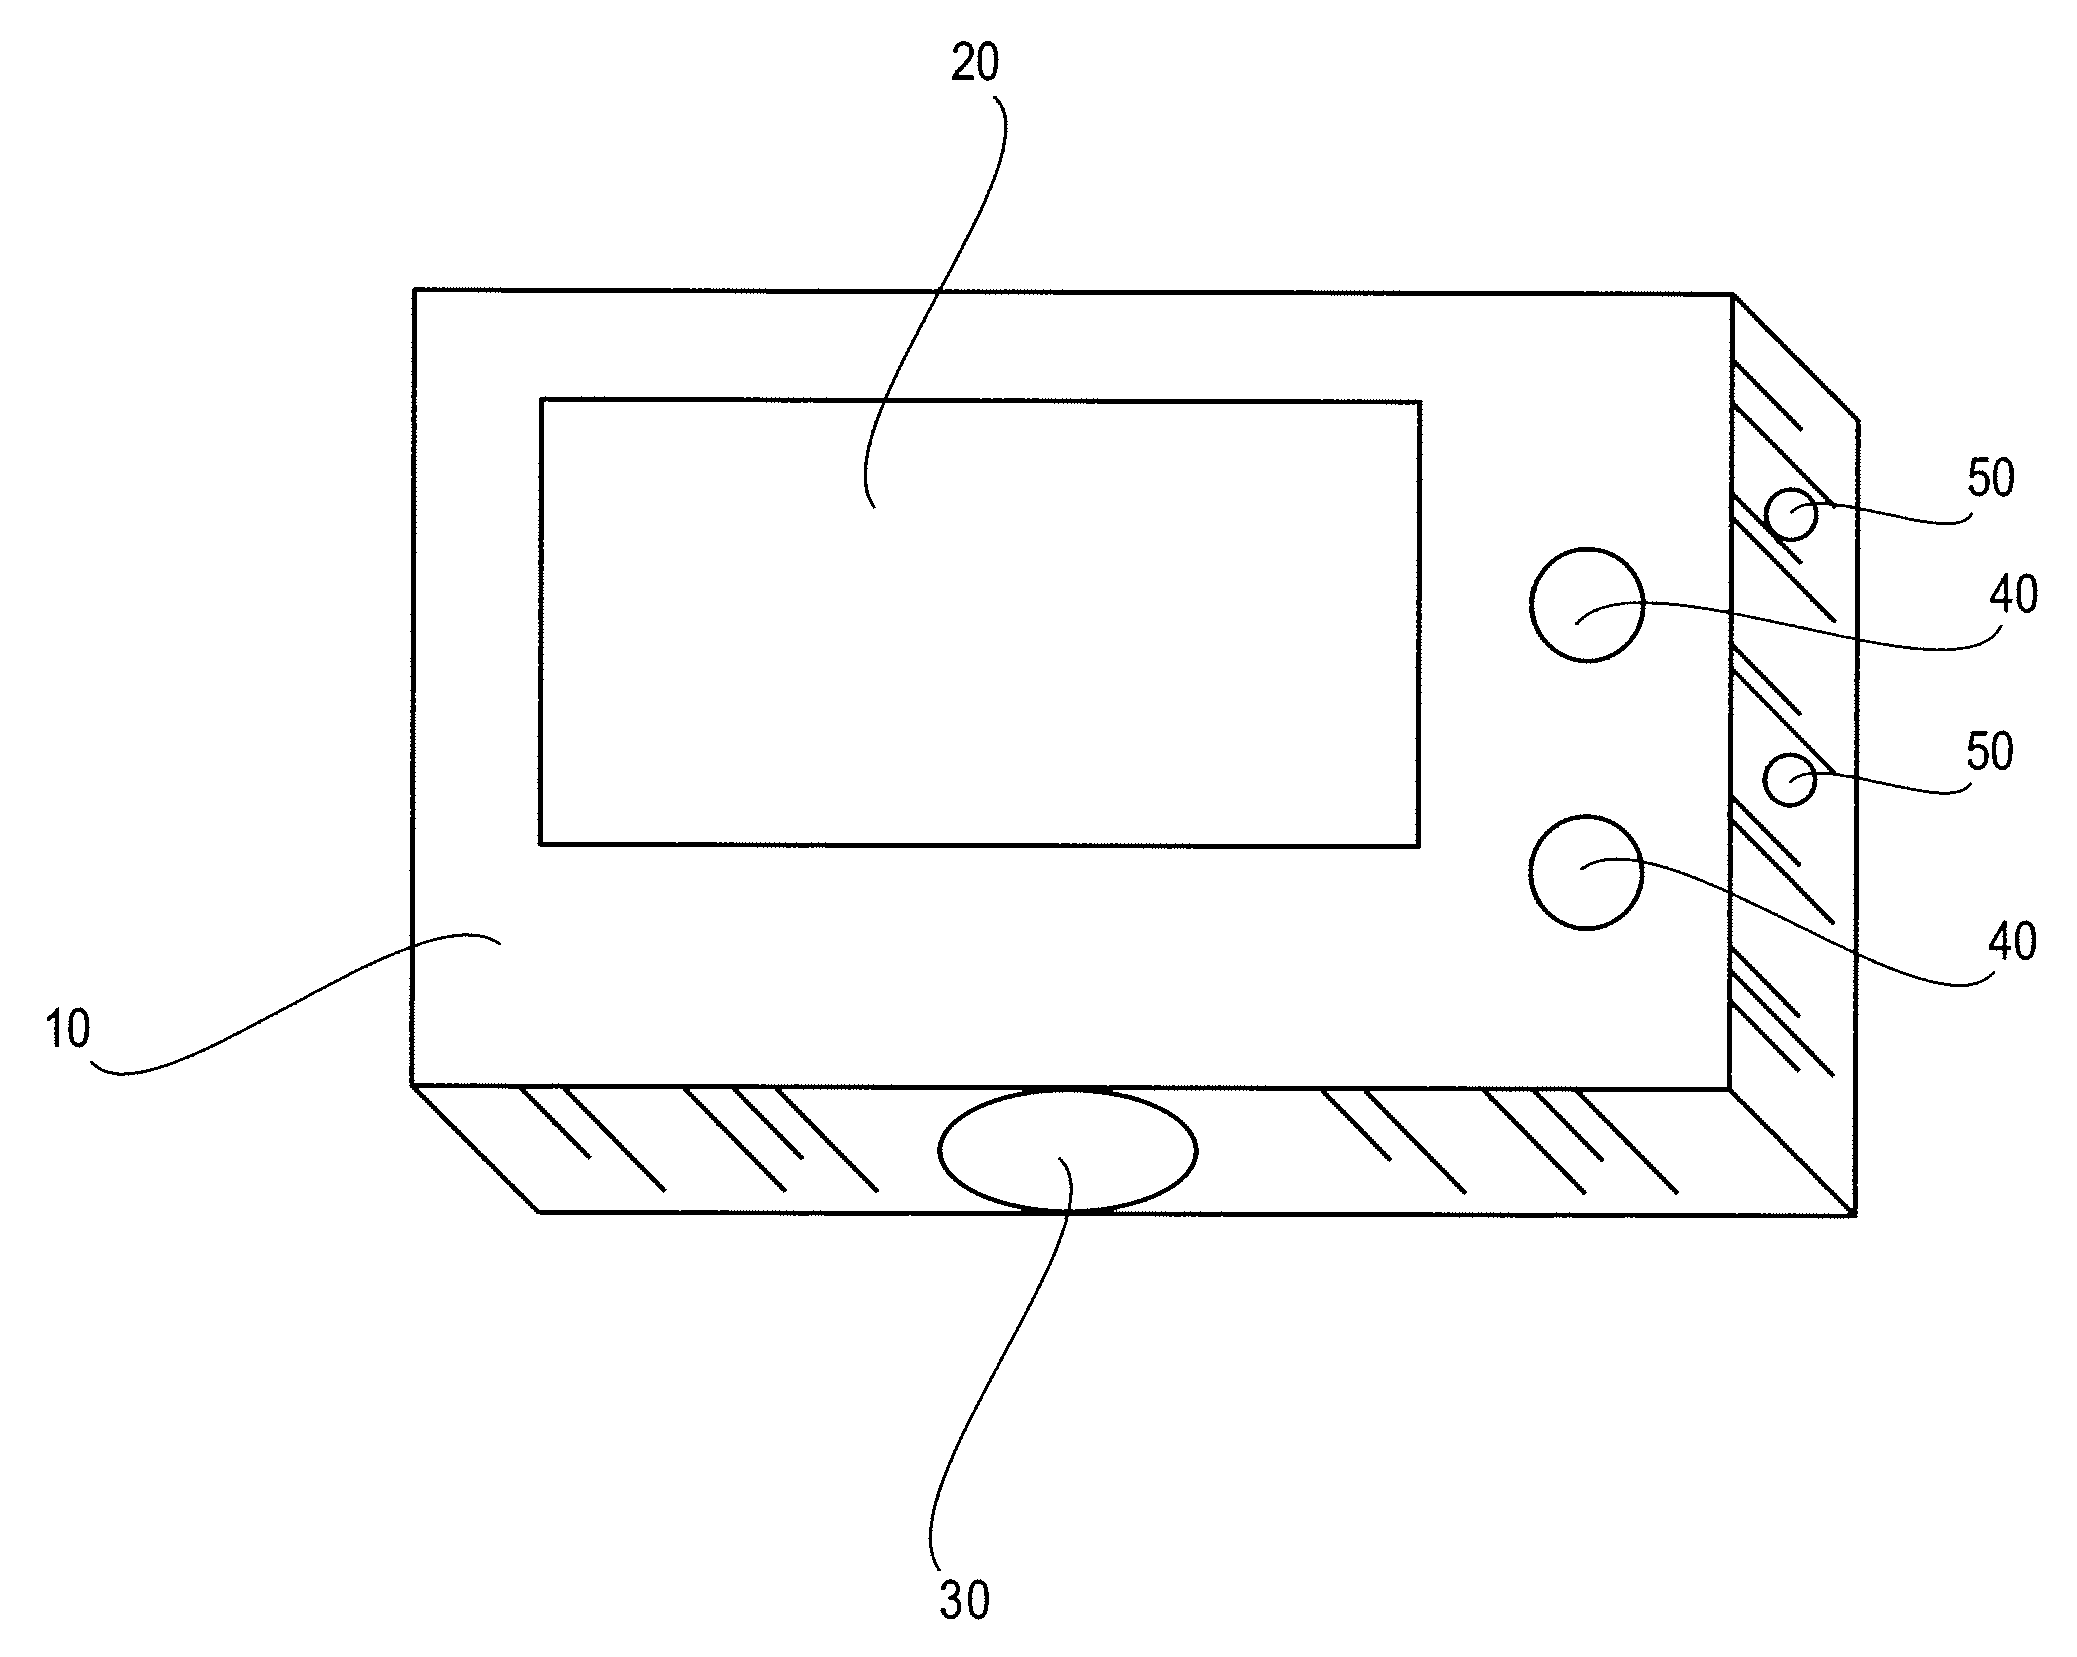 Text capture and presentation device